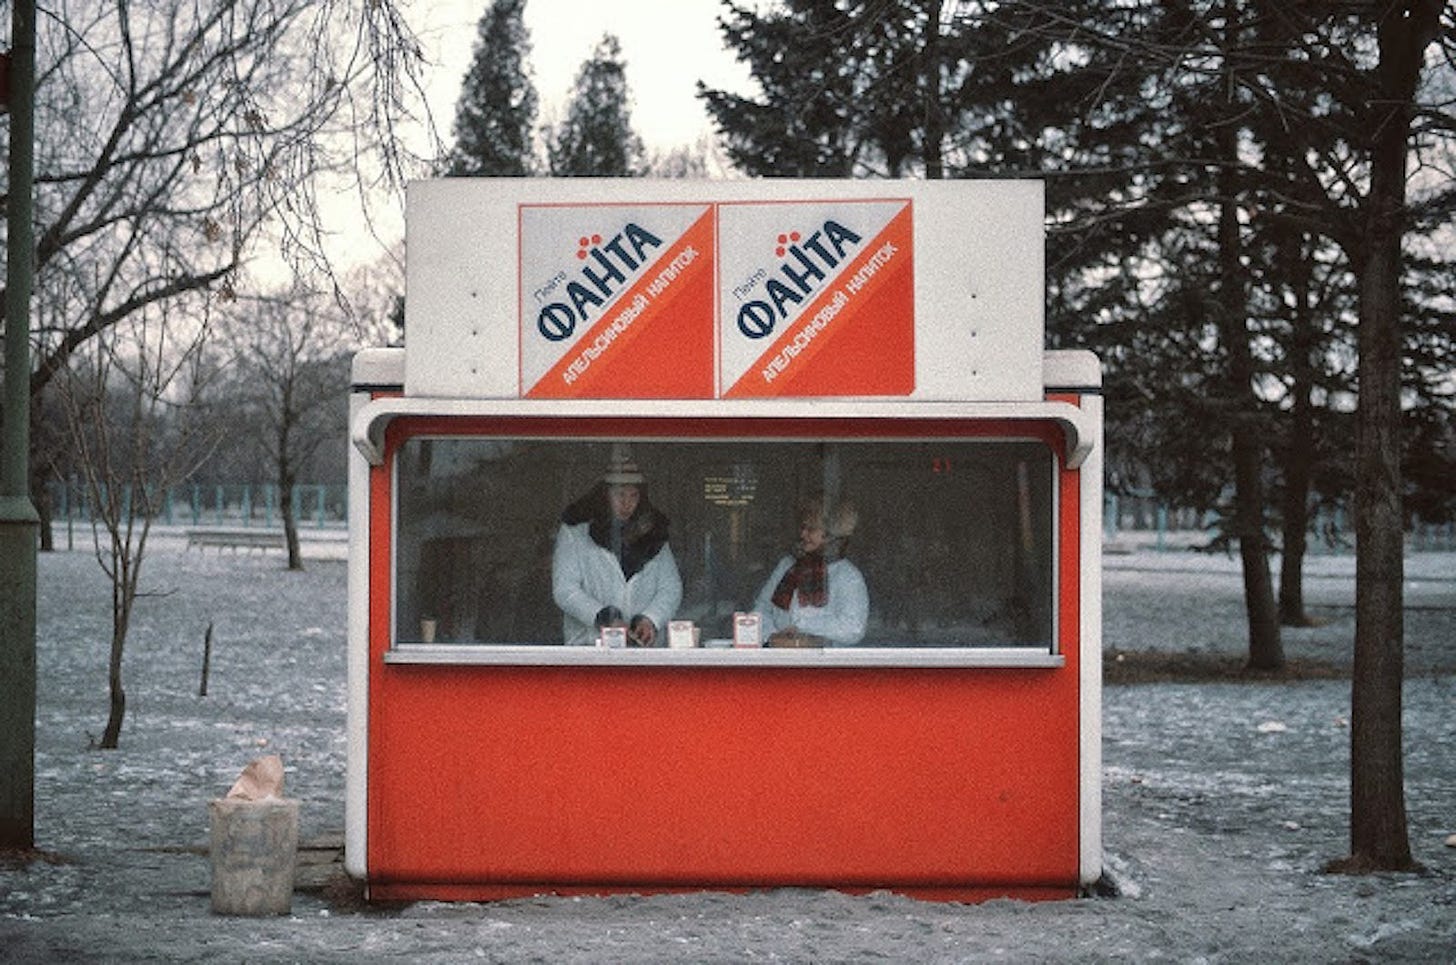 Refreshment stall in Gorky Park. Photo by Aad van der Drift, Moscow, USSR, 1984.